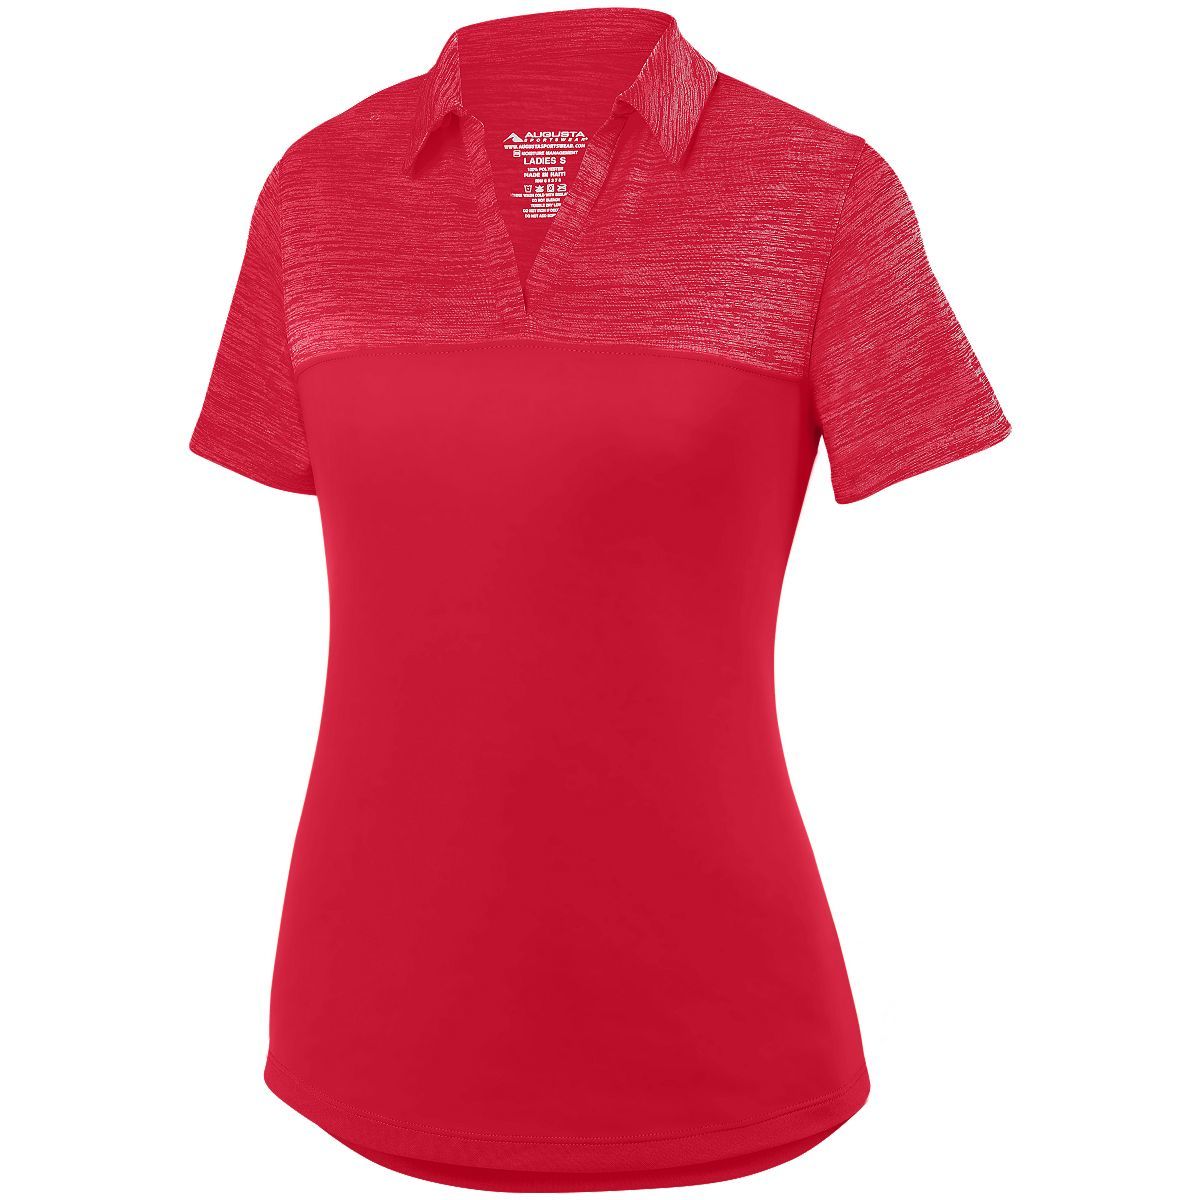 Augusta Sportswear Ladies Shadow Tonal Heather Polo in Red  -Part of the Ladies, Ladies-Polo, Polos, Augusta-Products, Shirts, Tonal-Fleece-Collection product lines at KanaleyCreations.com